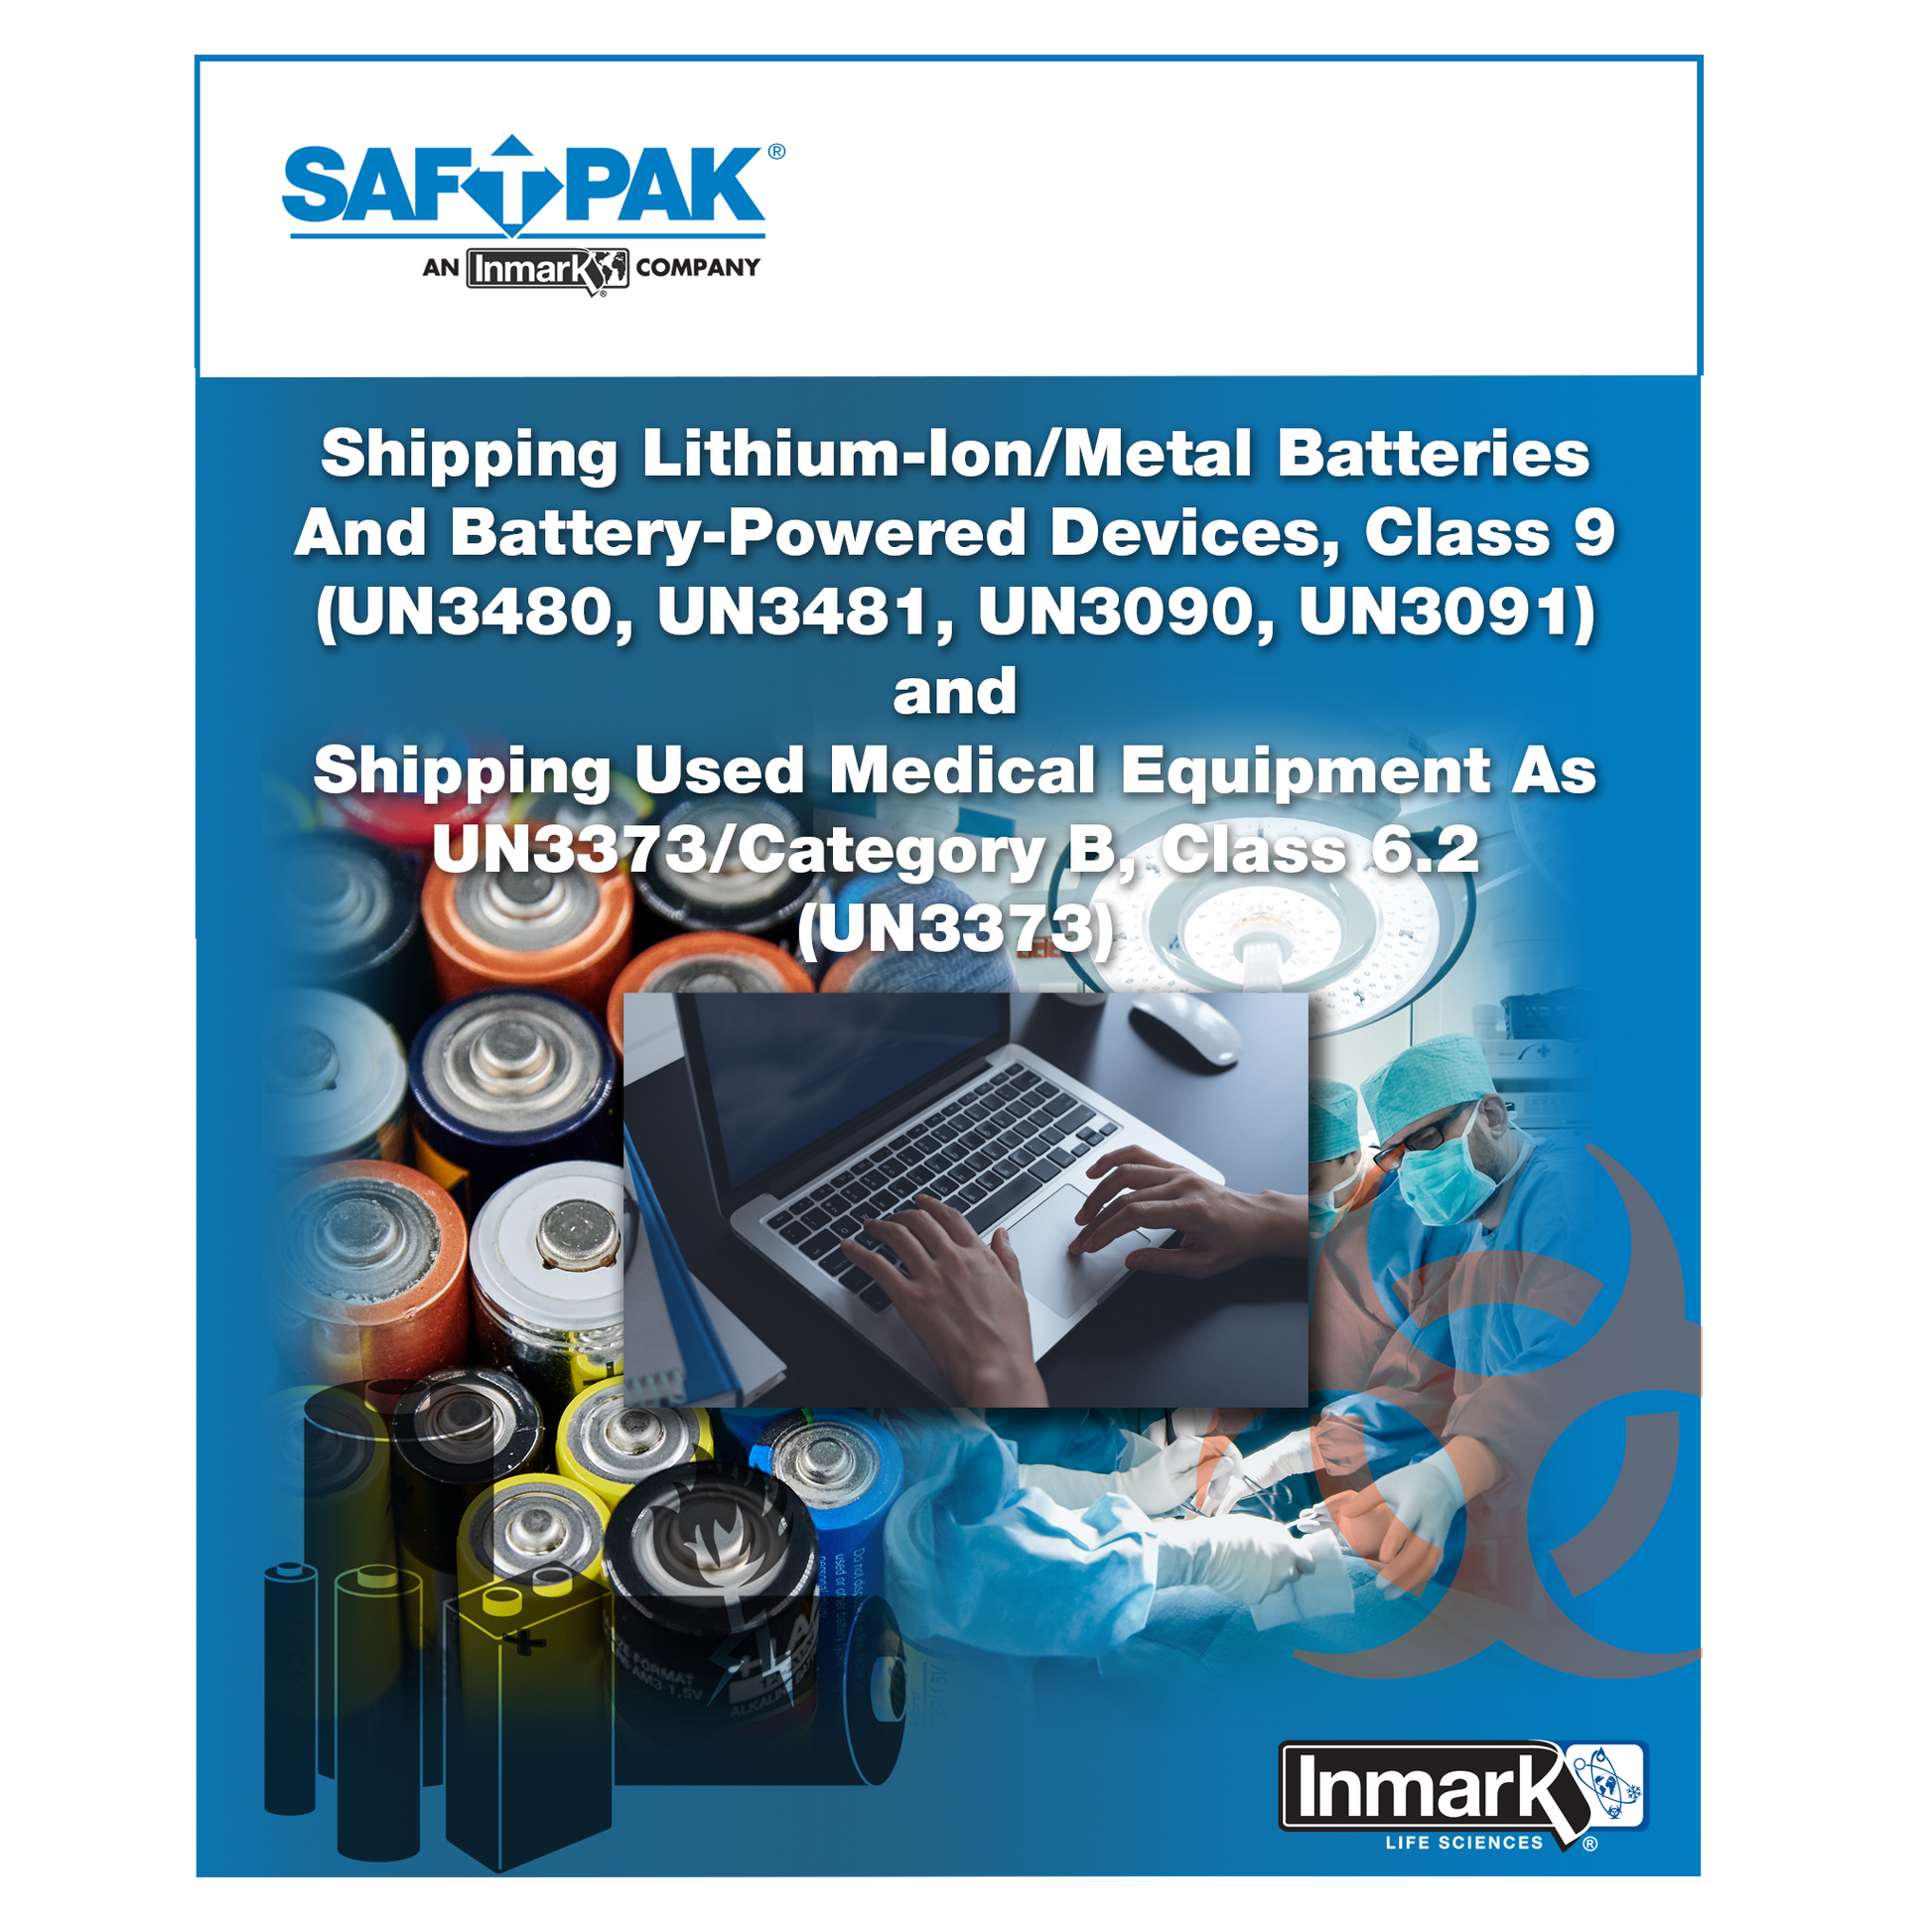 Shipping Used Medical Equipment As Category B, Class 6-2 (UN3373) and Shipping Lithium Battery and Lithium-Ion Batteries and Devices (UN3480, UN3481, UN3090, UN3901)